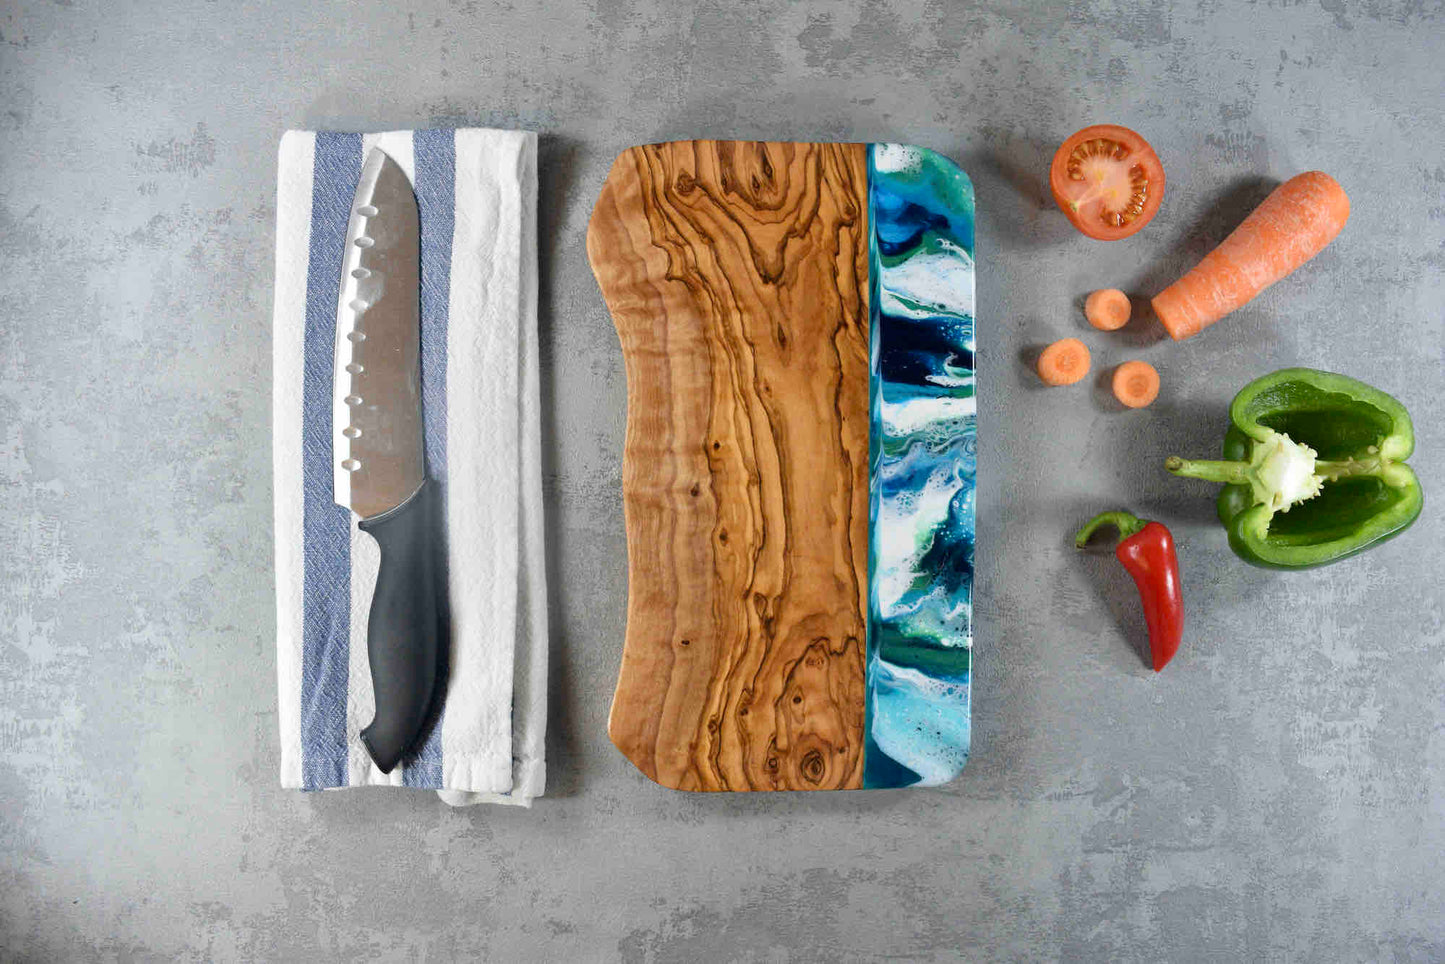 Cheese Board with Blue Green Resin Art 30cm - Unique Christmas Gift Ideas - Luxury Presents - Best Cheese Boards - Best Resin Artist